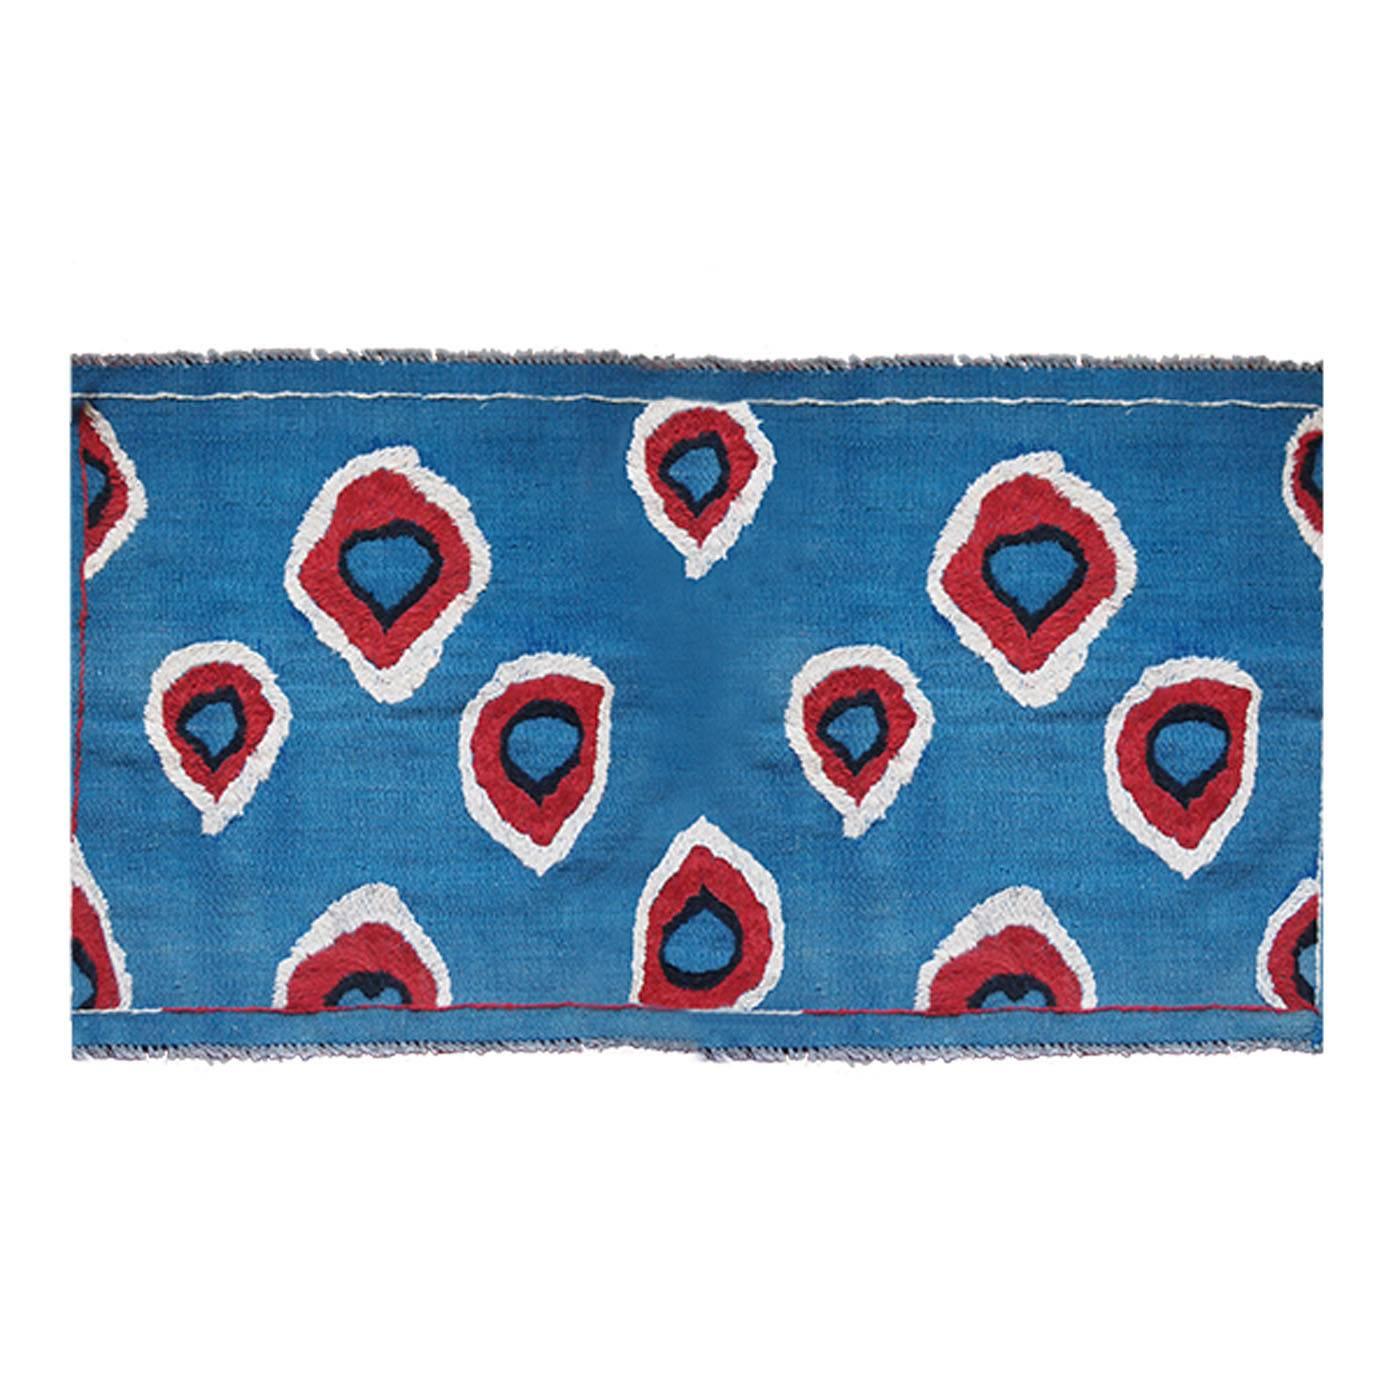 Hand Embroidered Ikat Kilim in Blue Red and White